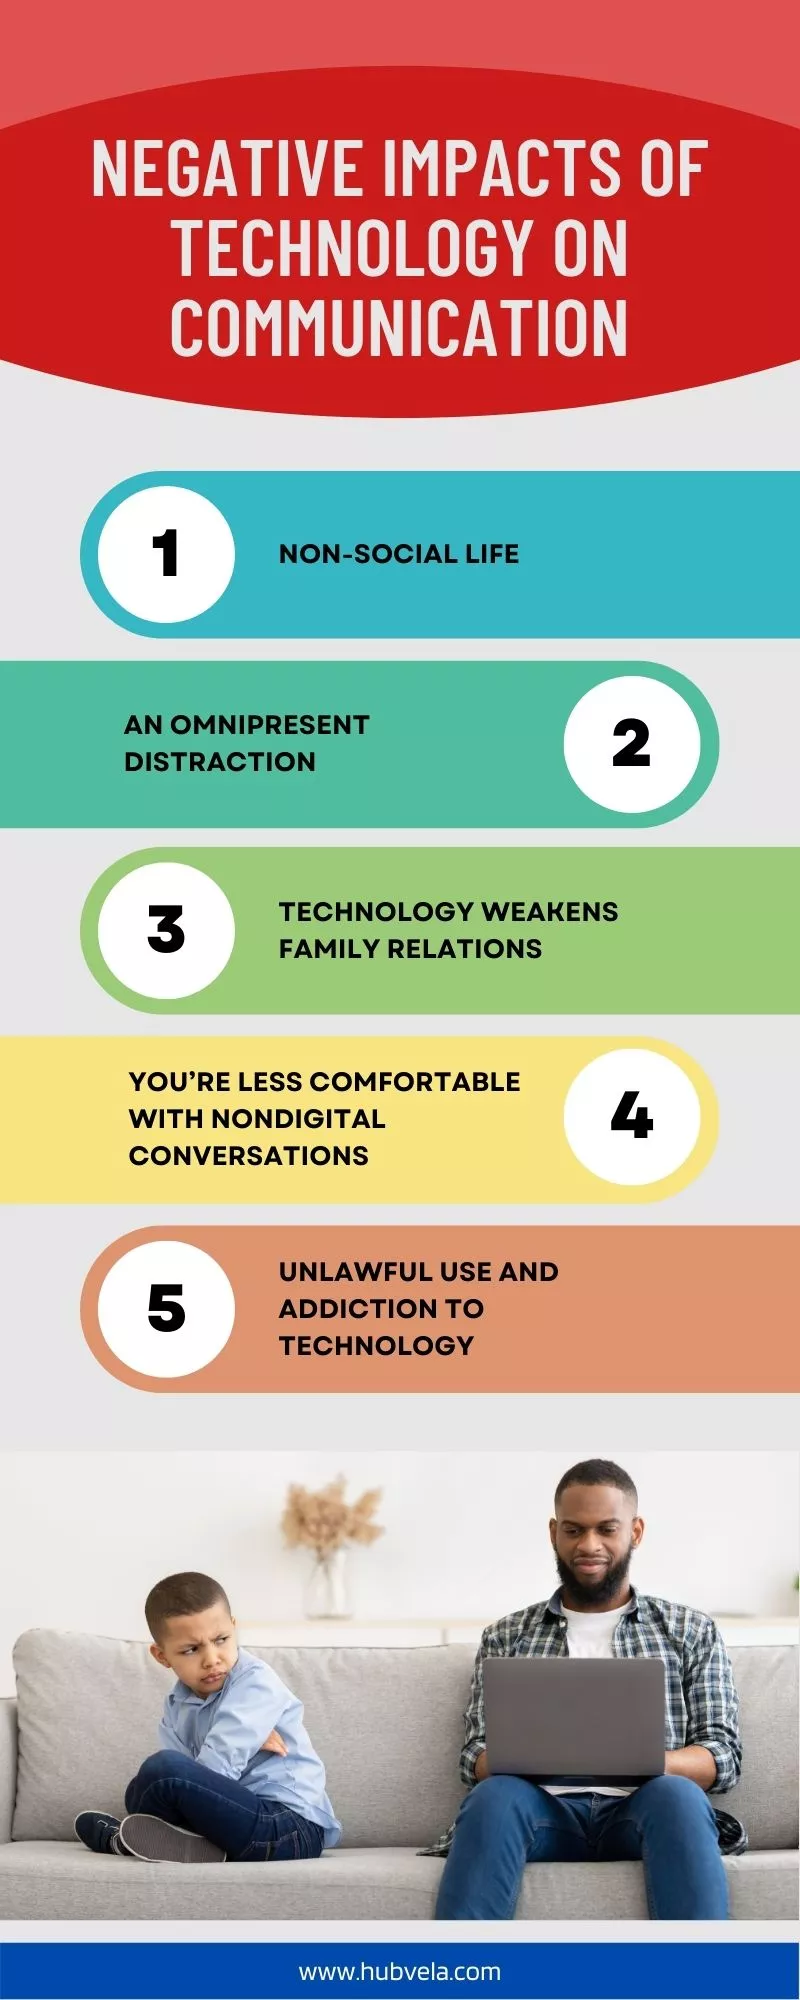 Negative Impacts of Technology on Communication infographic